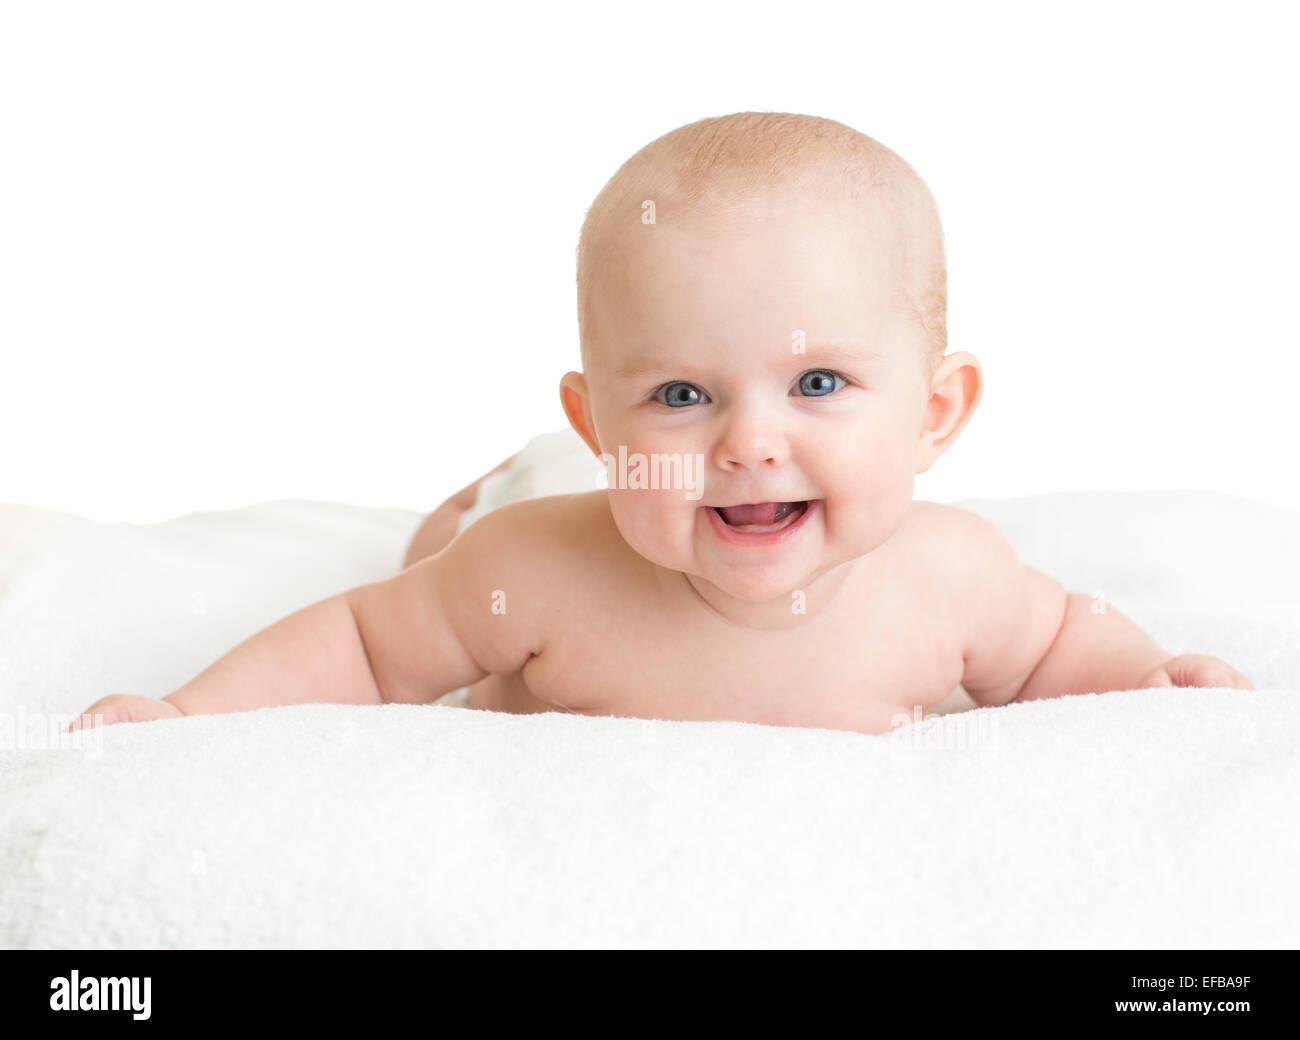 Cute smiling baby lying on white towel Stock Photo